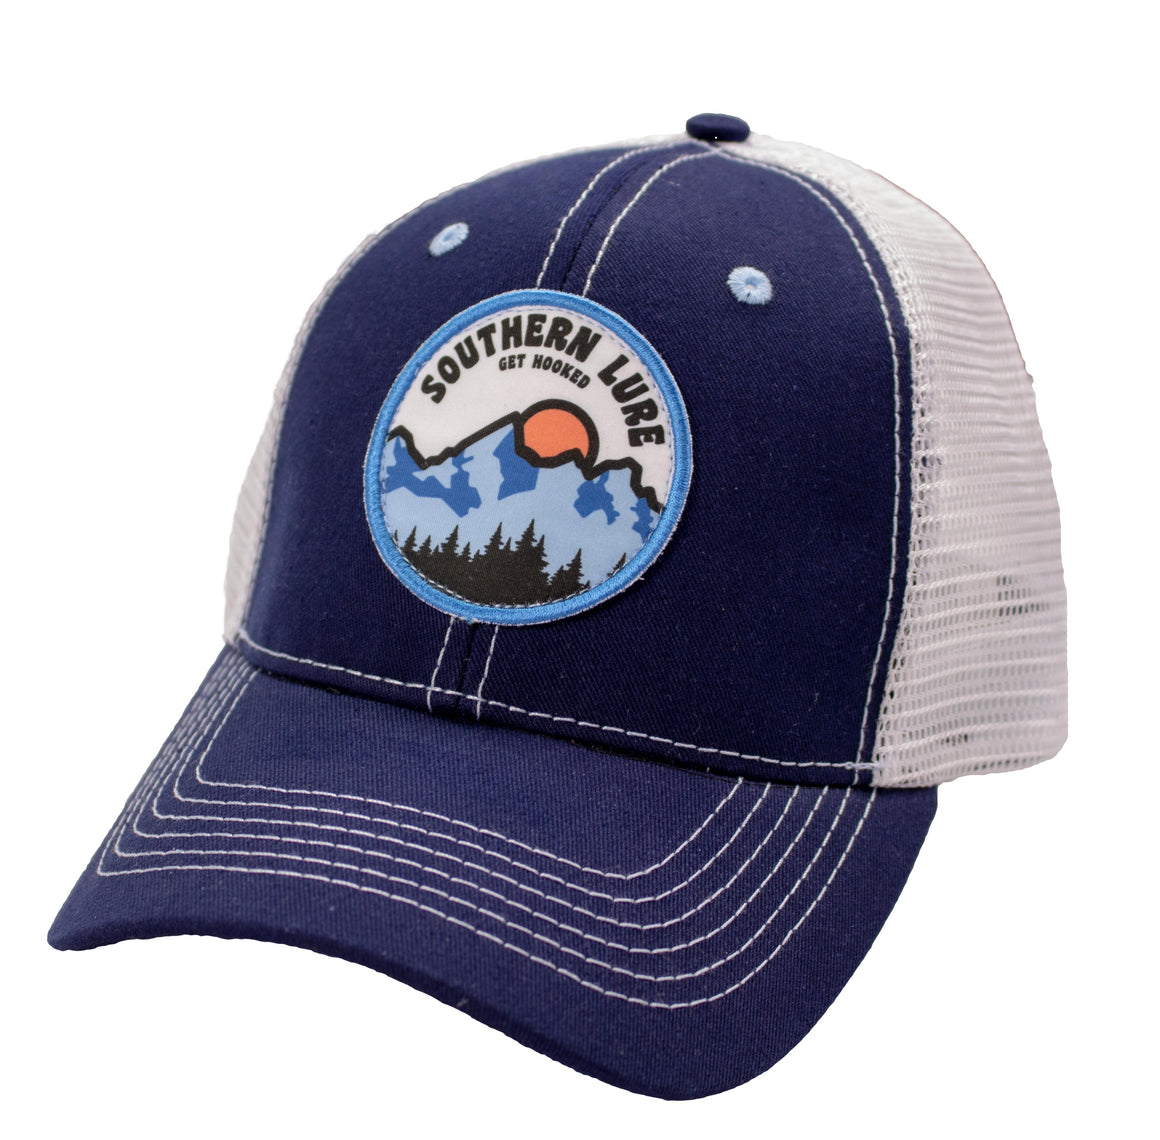 Youth - Trucker Hat - Circle MTN Patch - Navy/White